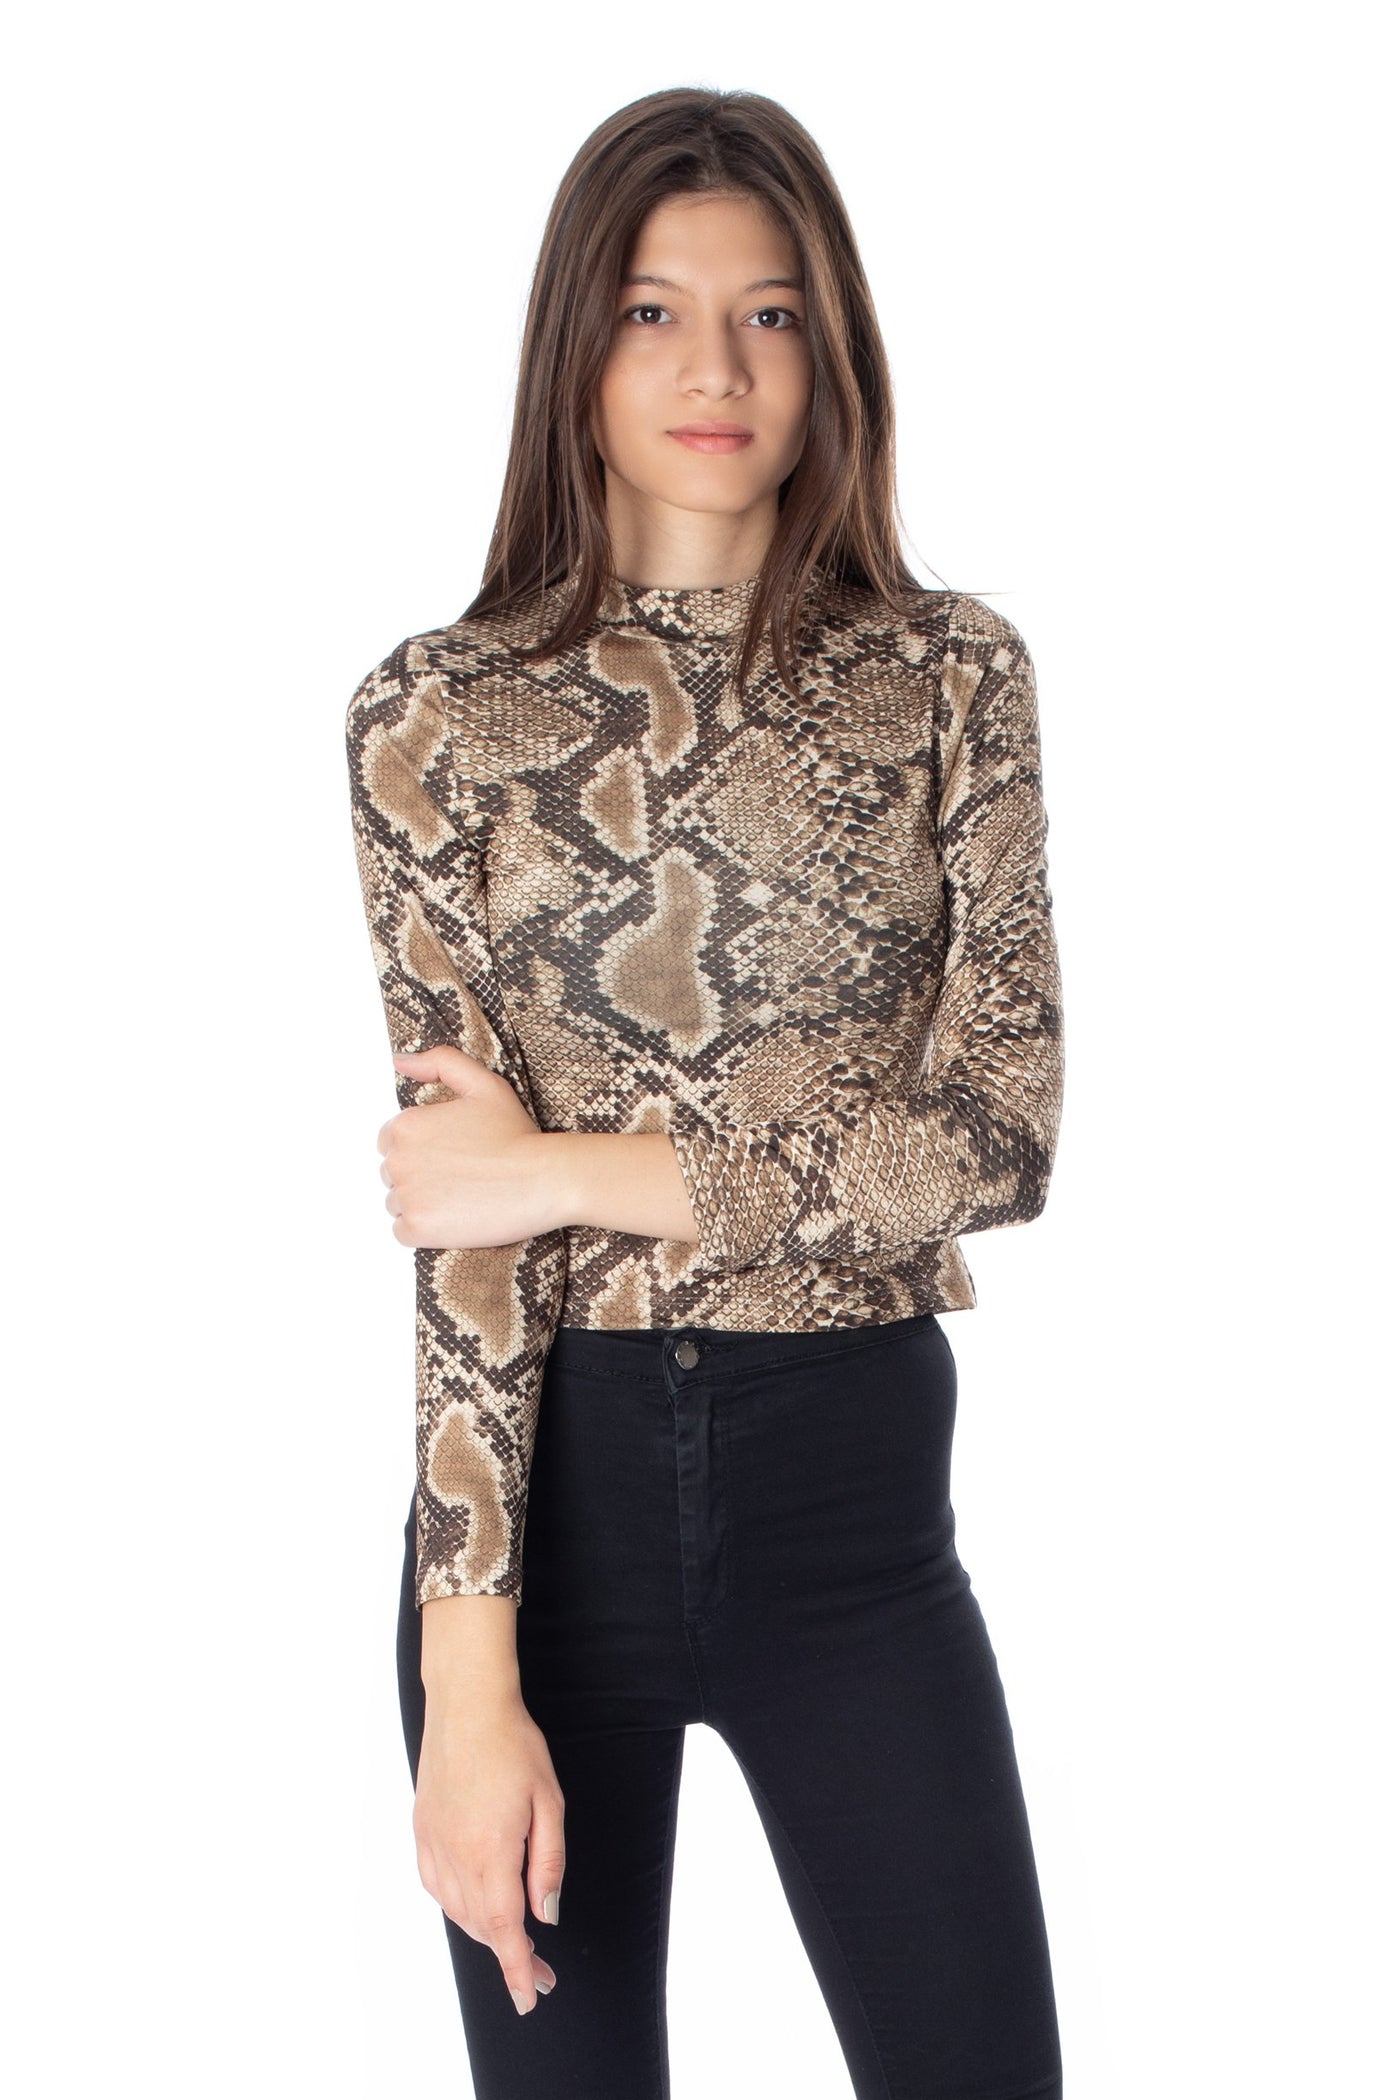 chassca high neck long sleeve blouse with snake print - Breakmood